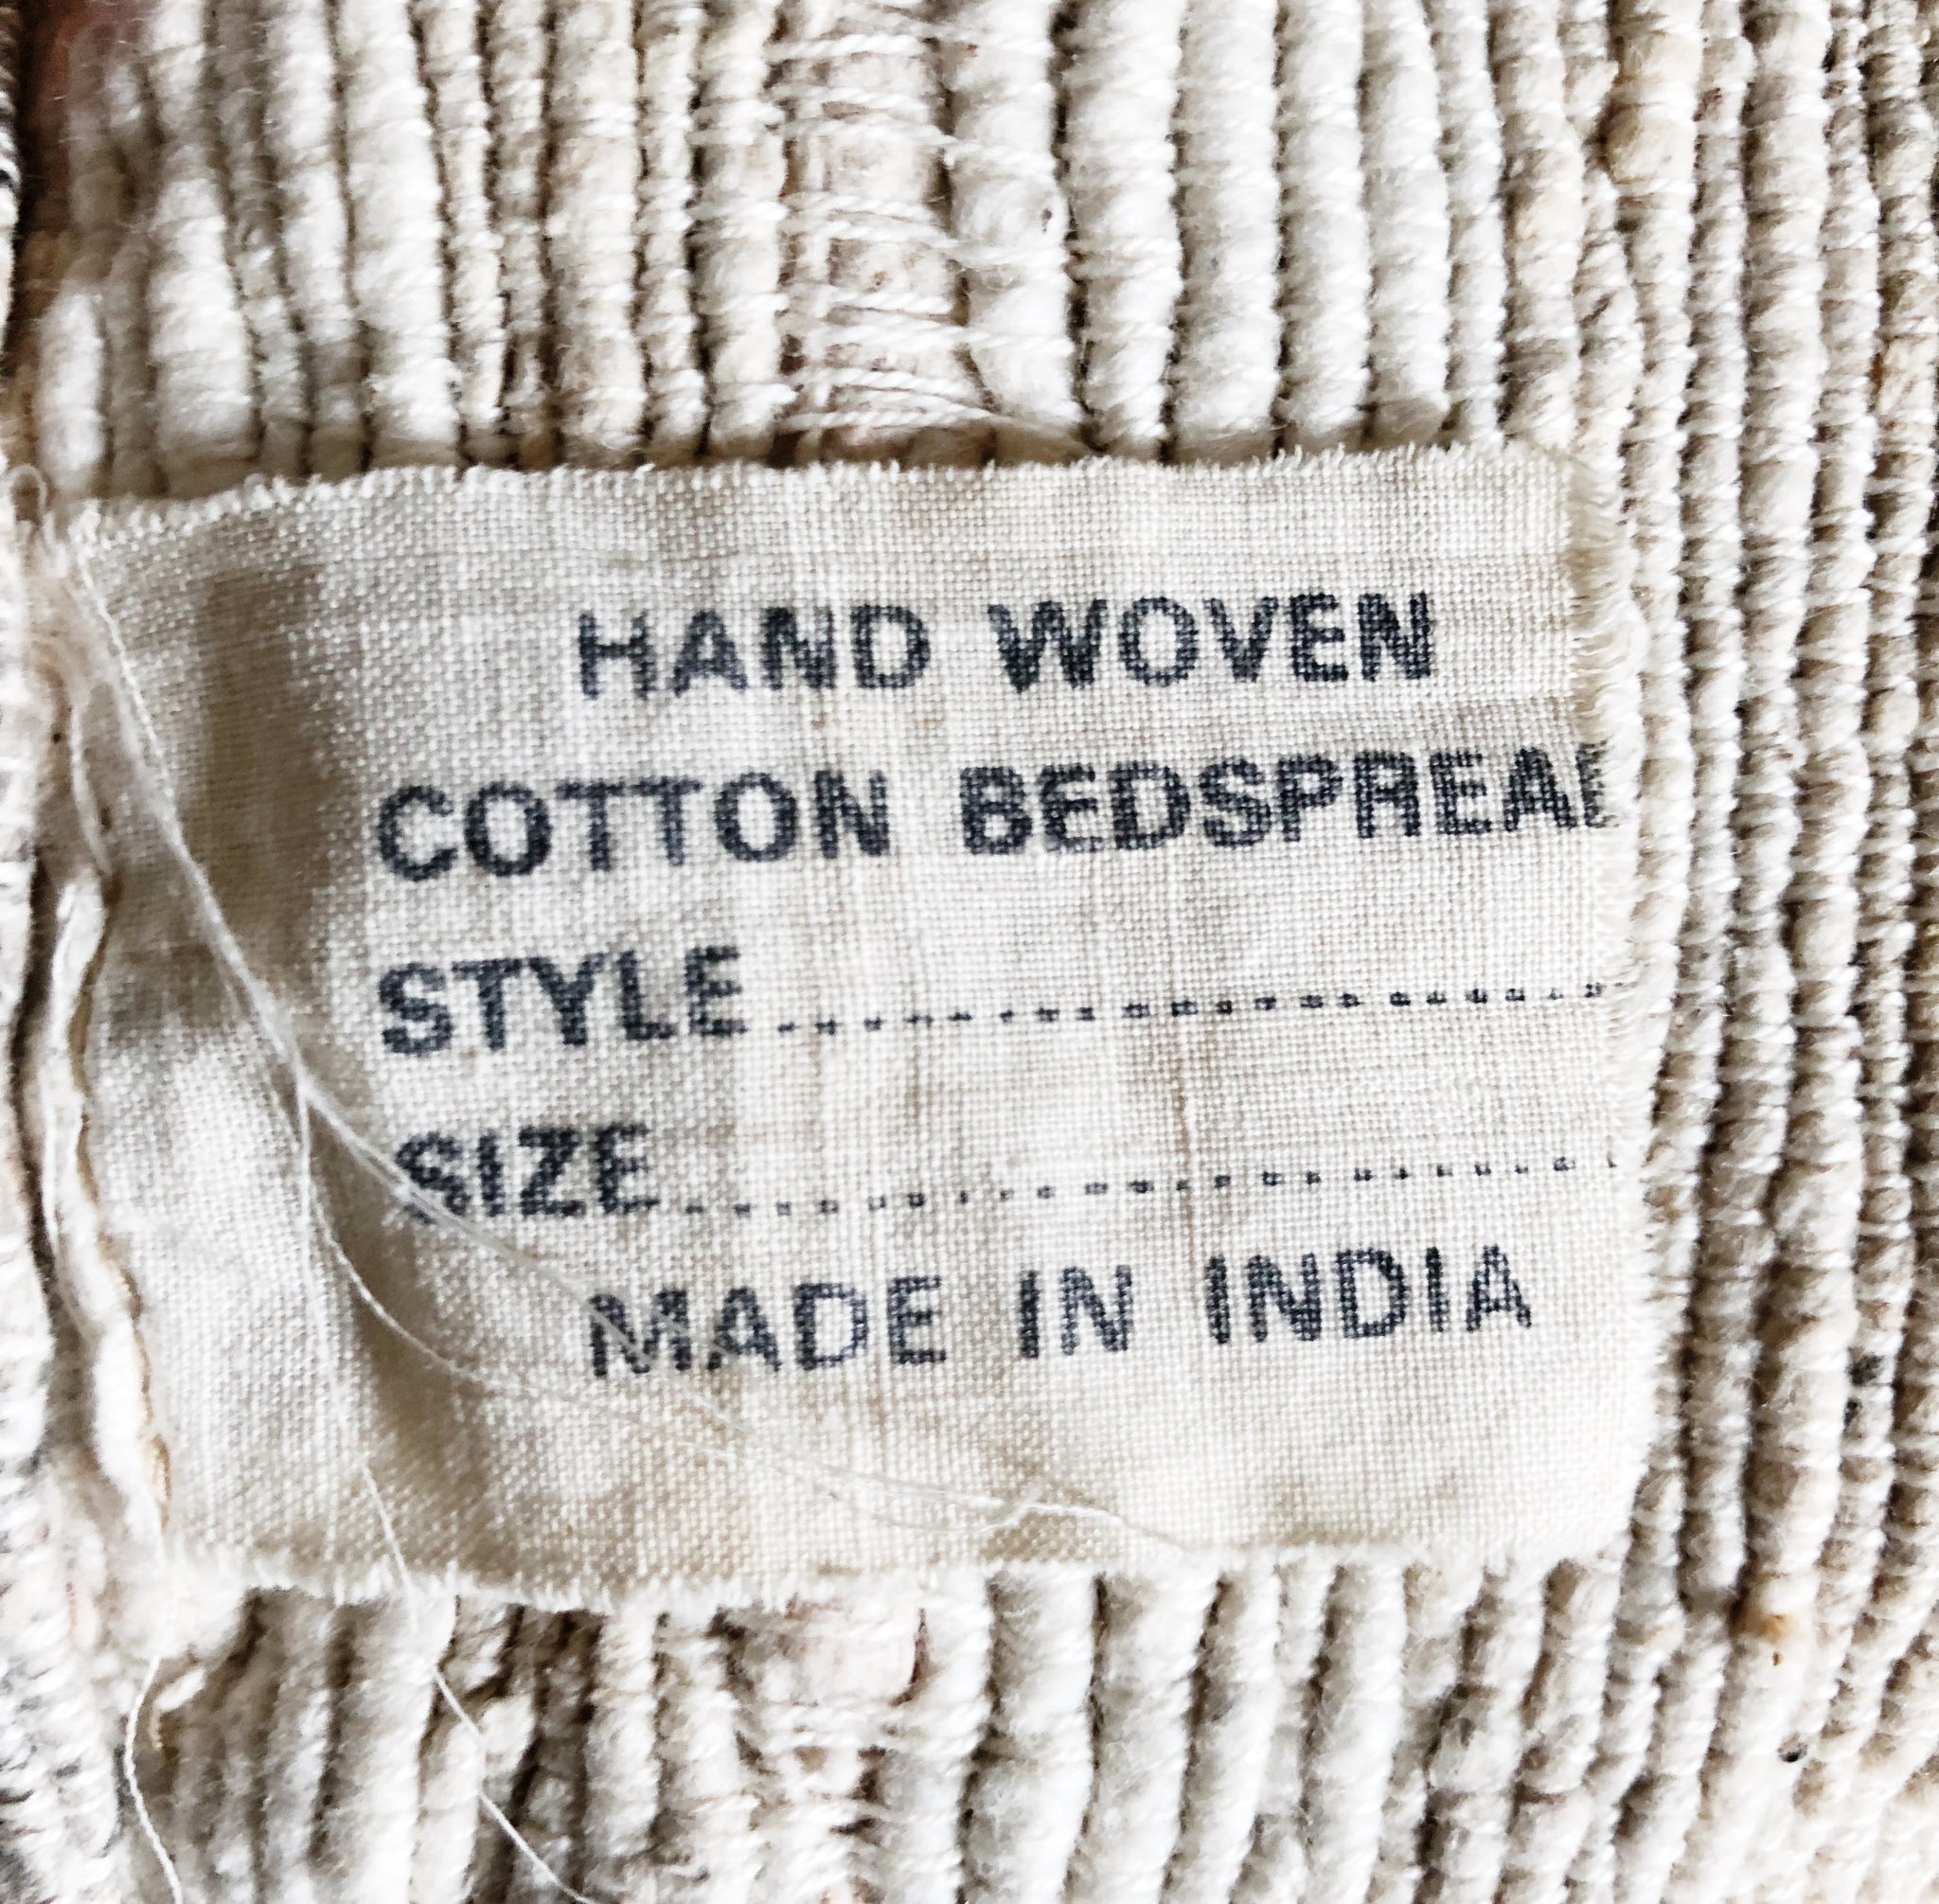 Indian Cotton Spread and Pillows Set